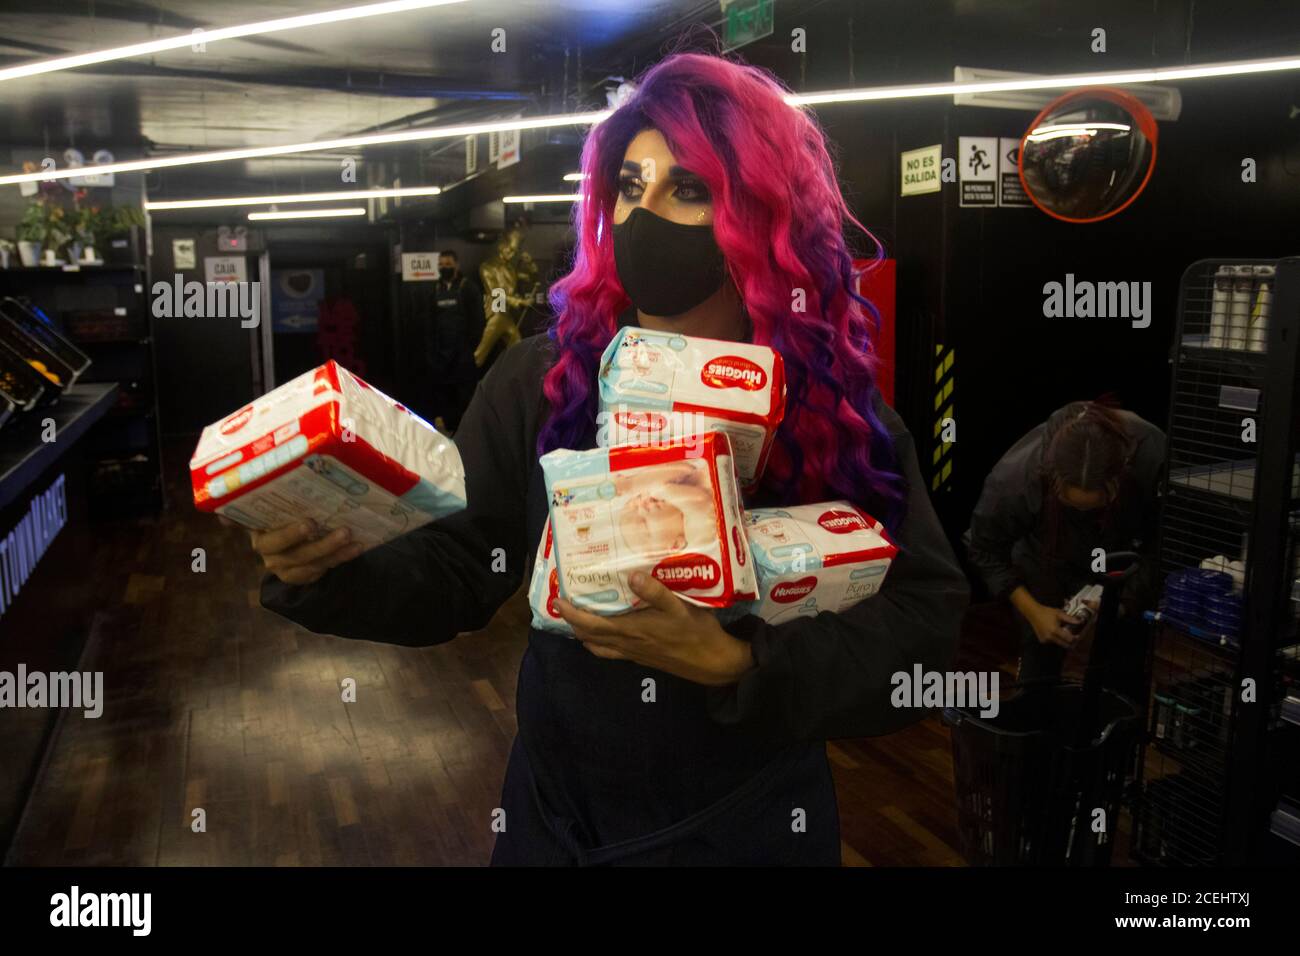 Andrés (a.k.a Uriel The Drag) works as a grocery store employee at Downtown Market. He restocks shelves and welcomes customers. In Peru 647,166 people have been infected and 28,788 have died because of Covid-19 as of August 31, 2020. Stock Photo